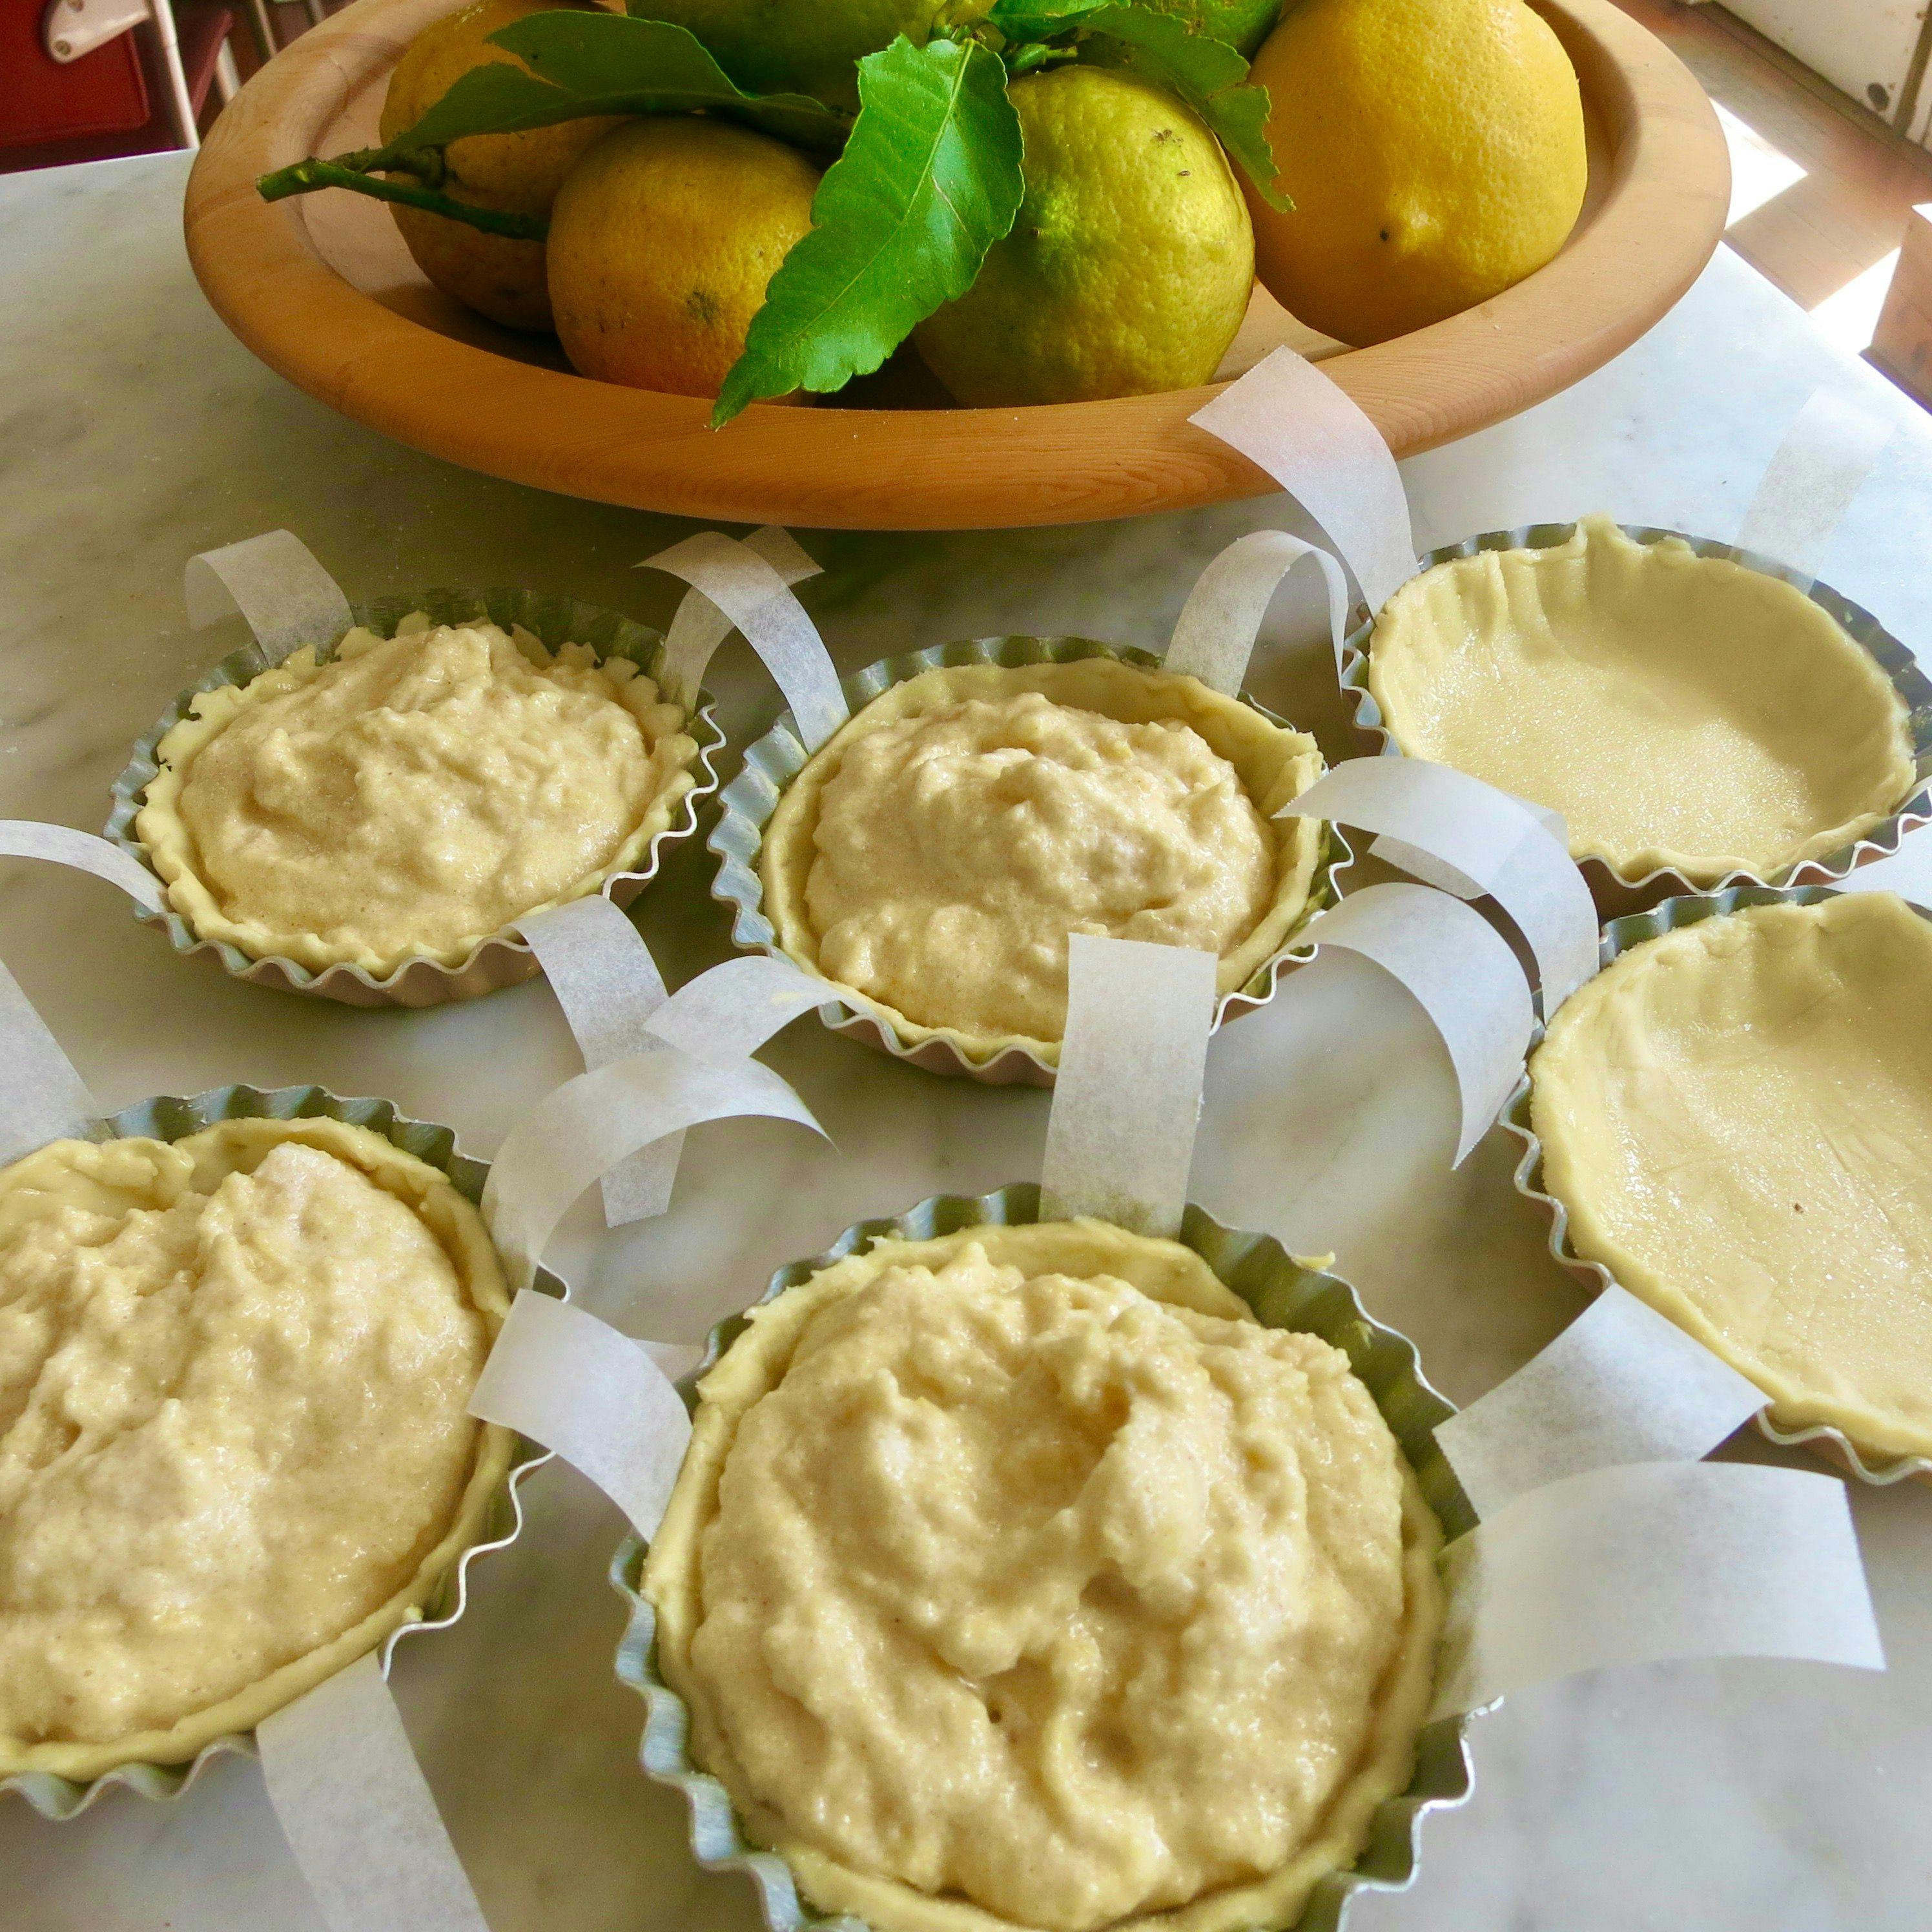 pie dishes filled with the 'crema reale'